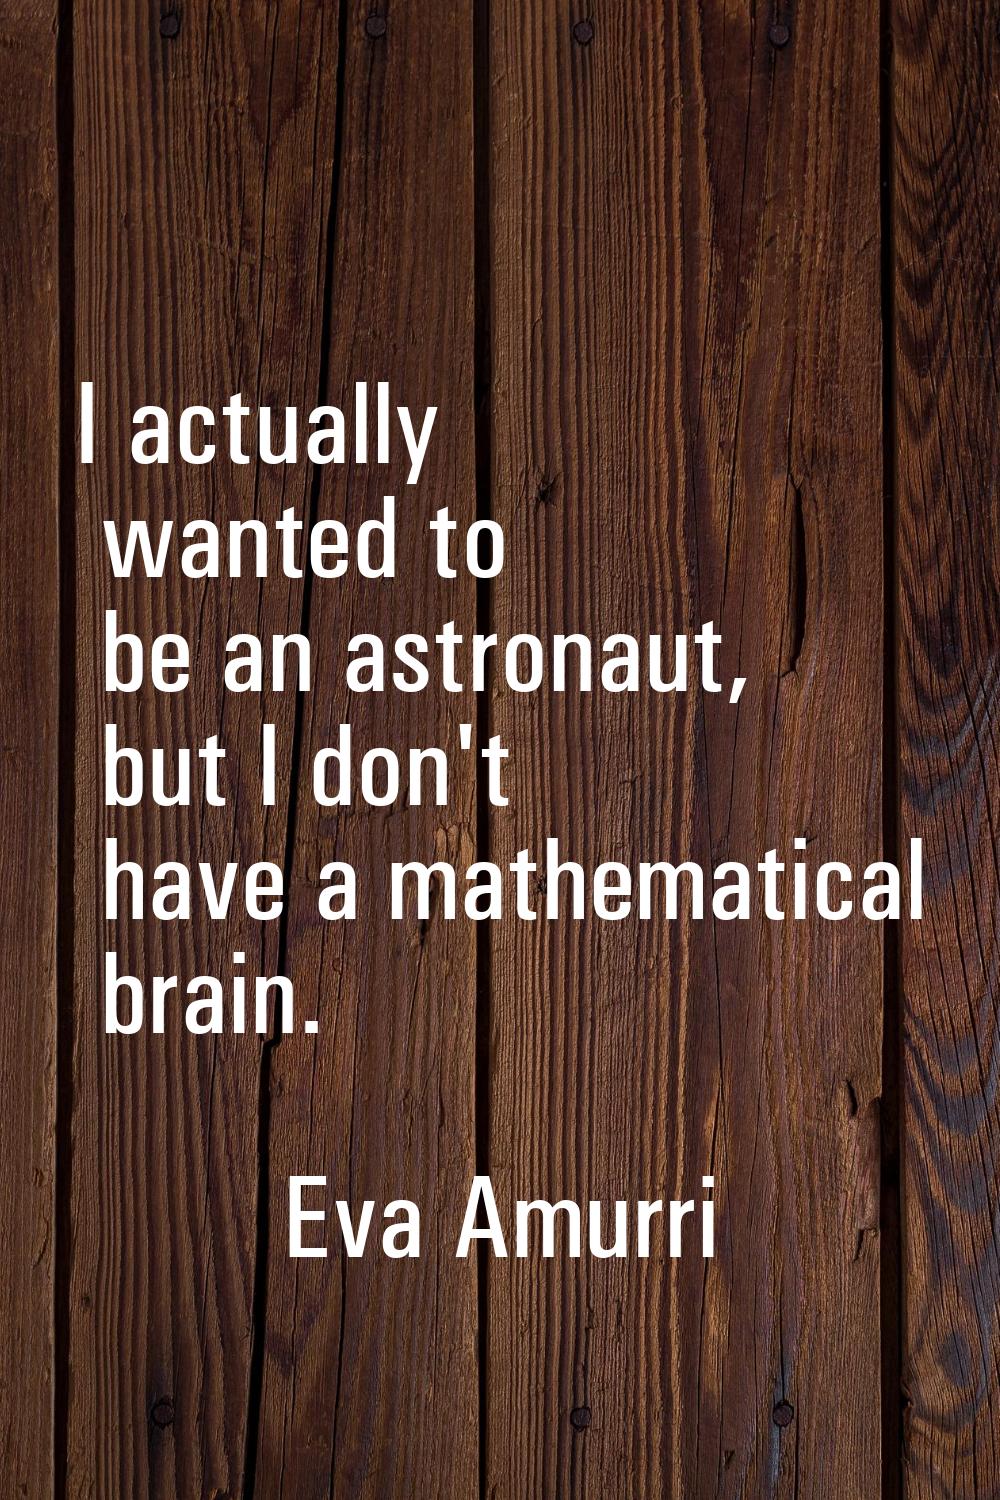 I actually wanted to be an astronaut, but I don't have a mathematical brain.